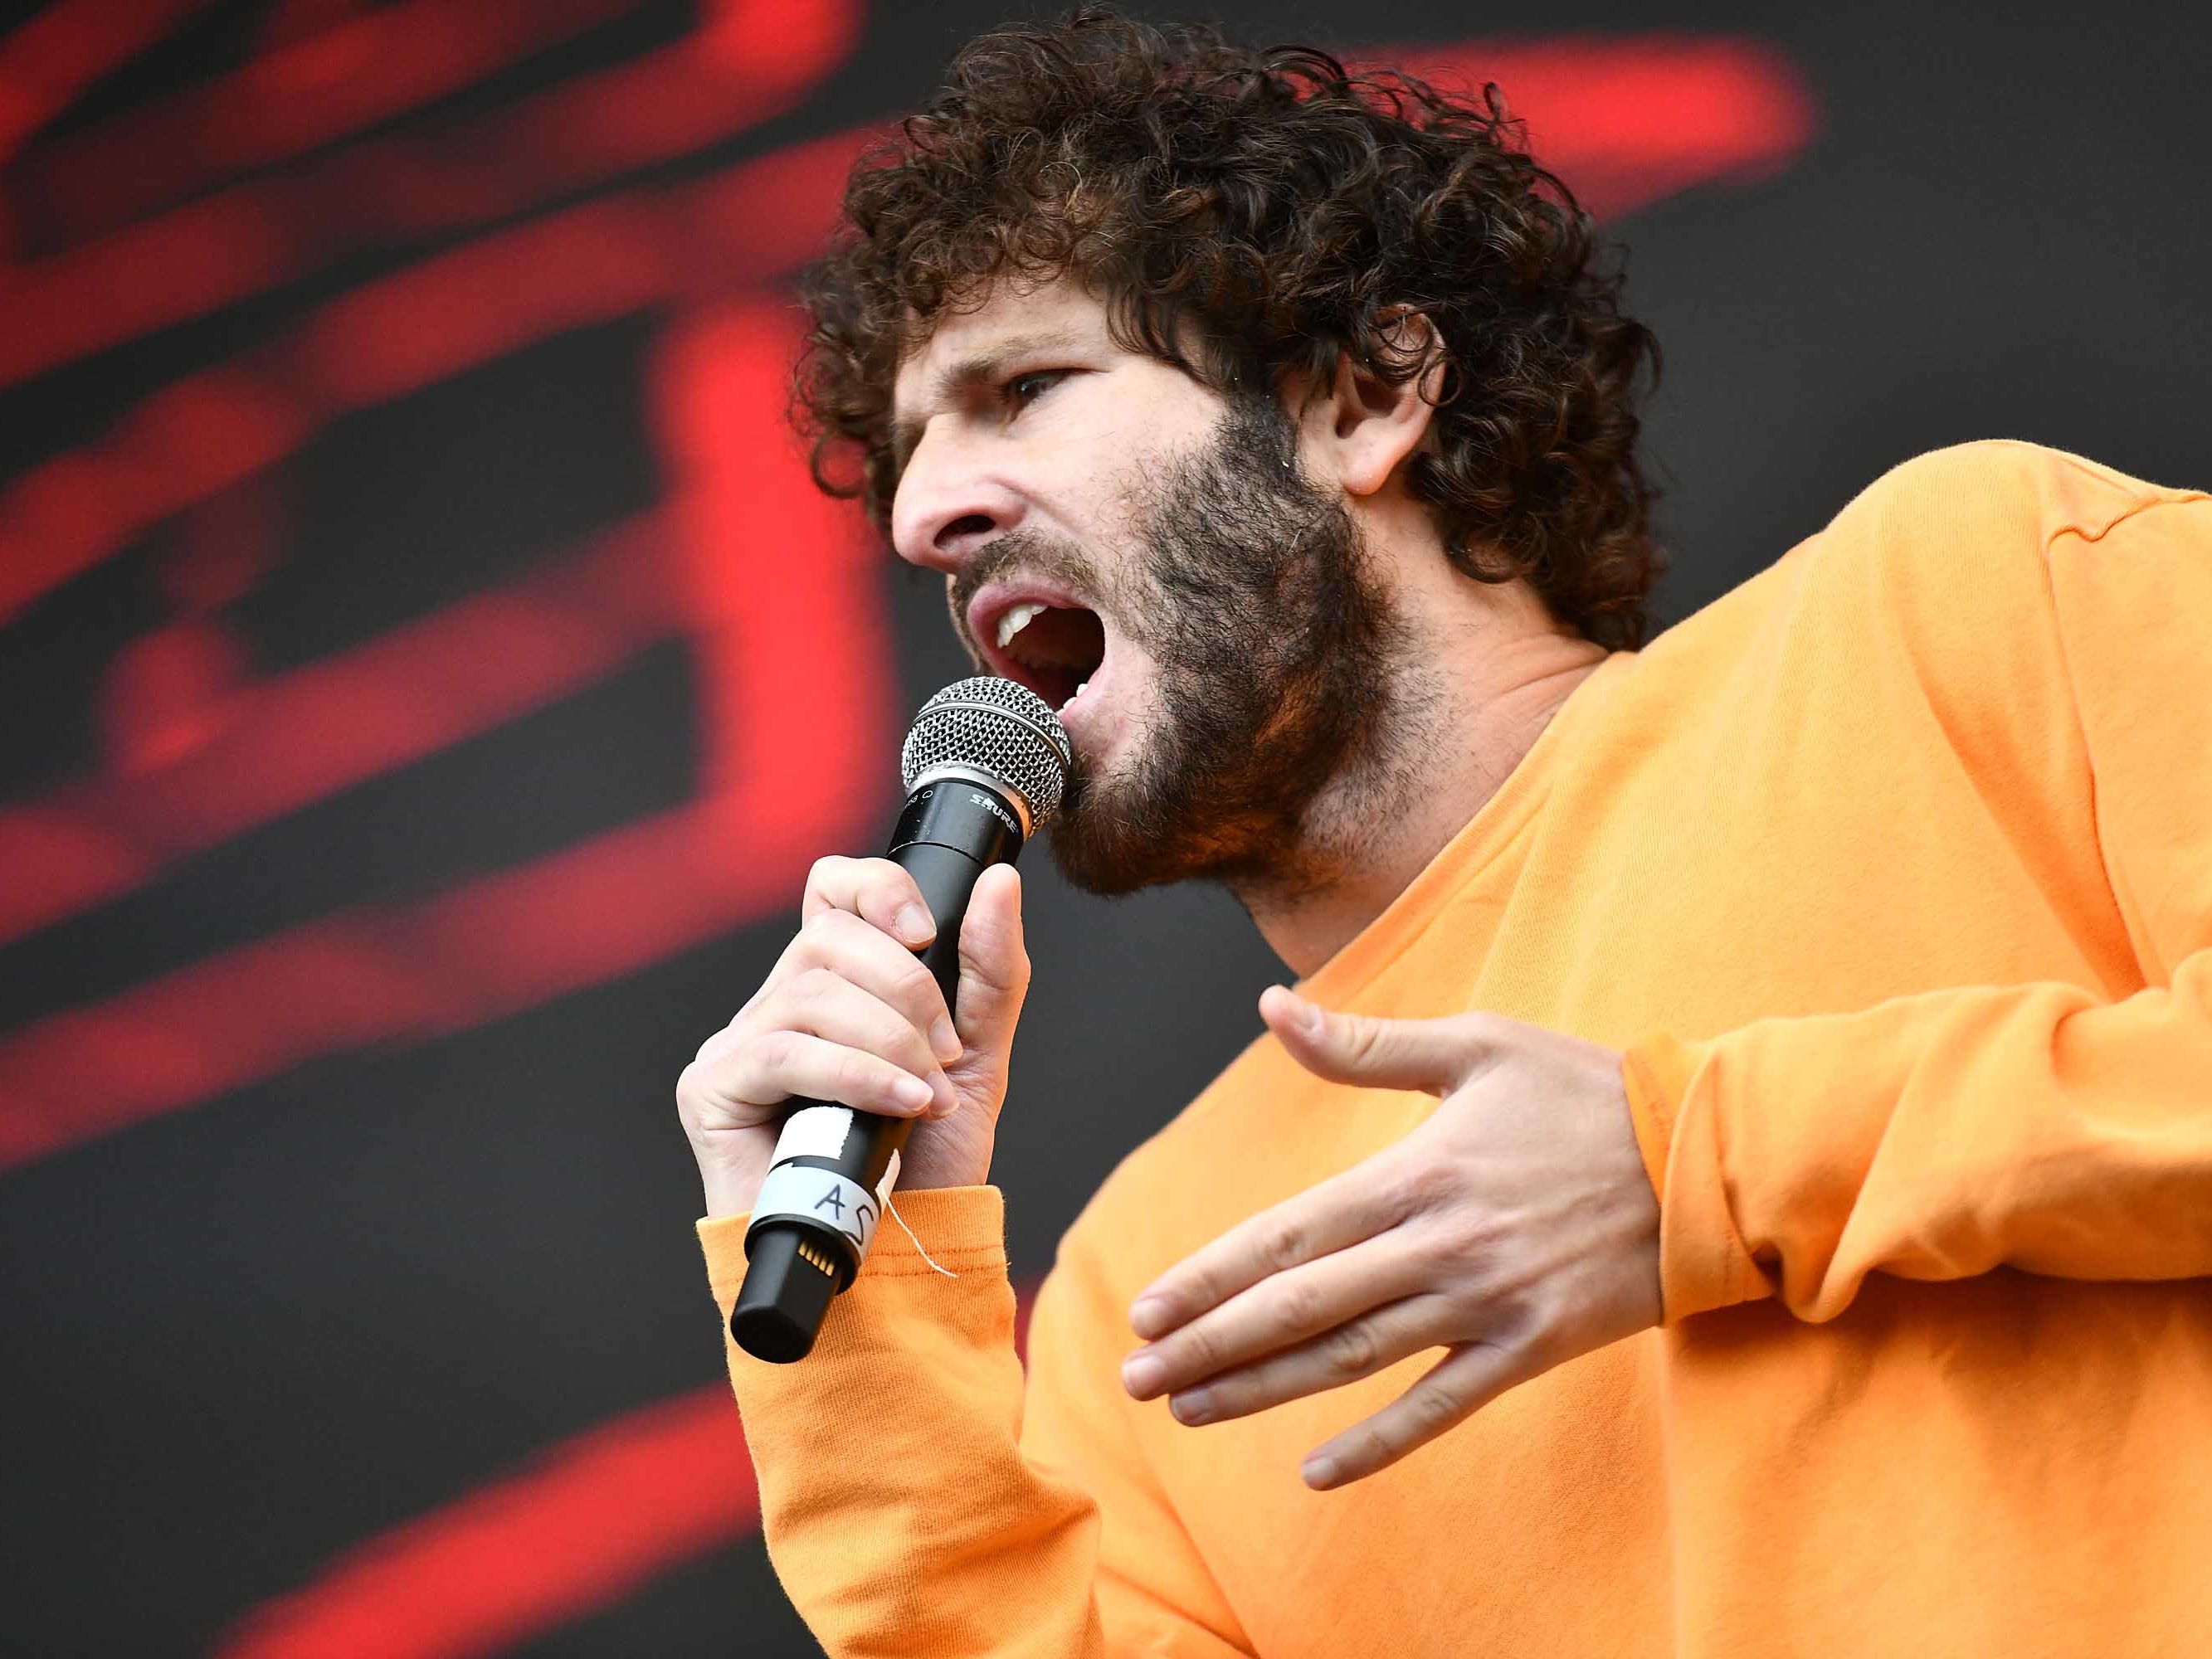 Lil Dicky. Lil Dicky Earth. Little dick. Lil dick